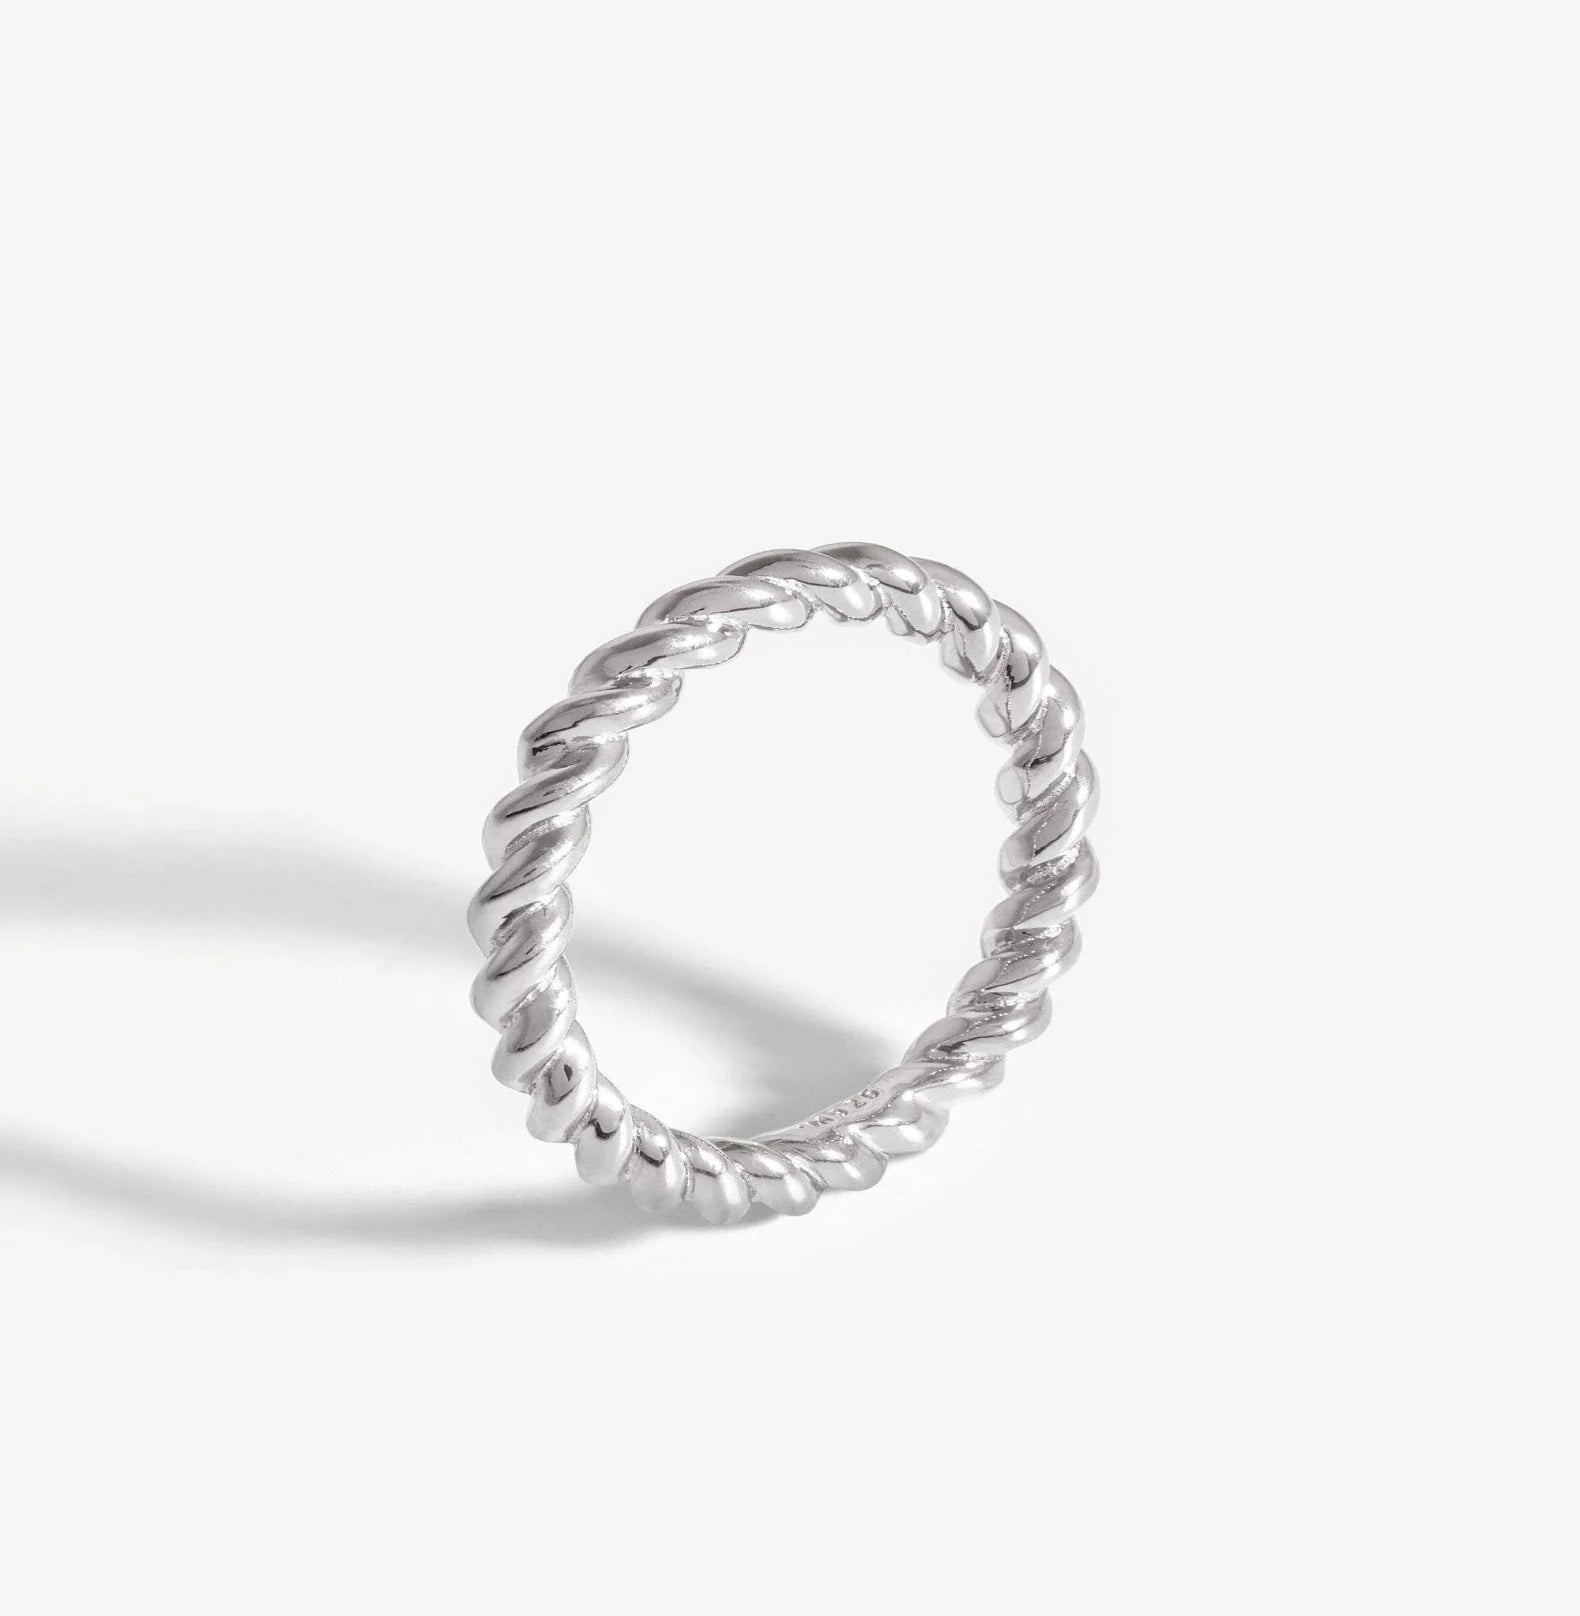 FLUX STACKING RING - SILVER ring Yubama Jewelry Online Store - The Elegant Designs of Gold and Silver ! Silver No4 